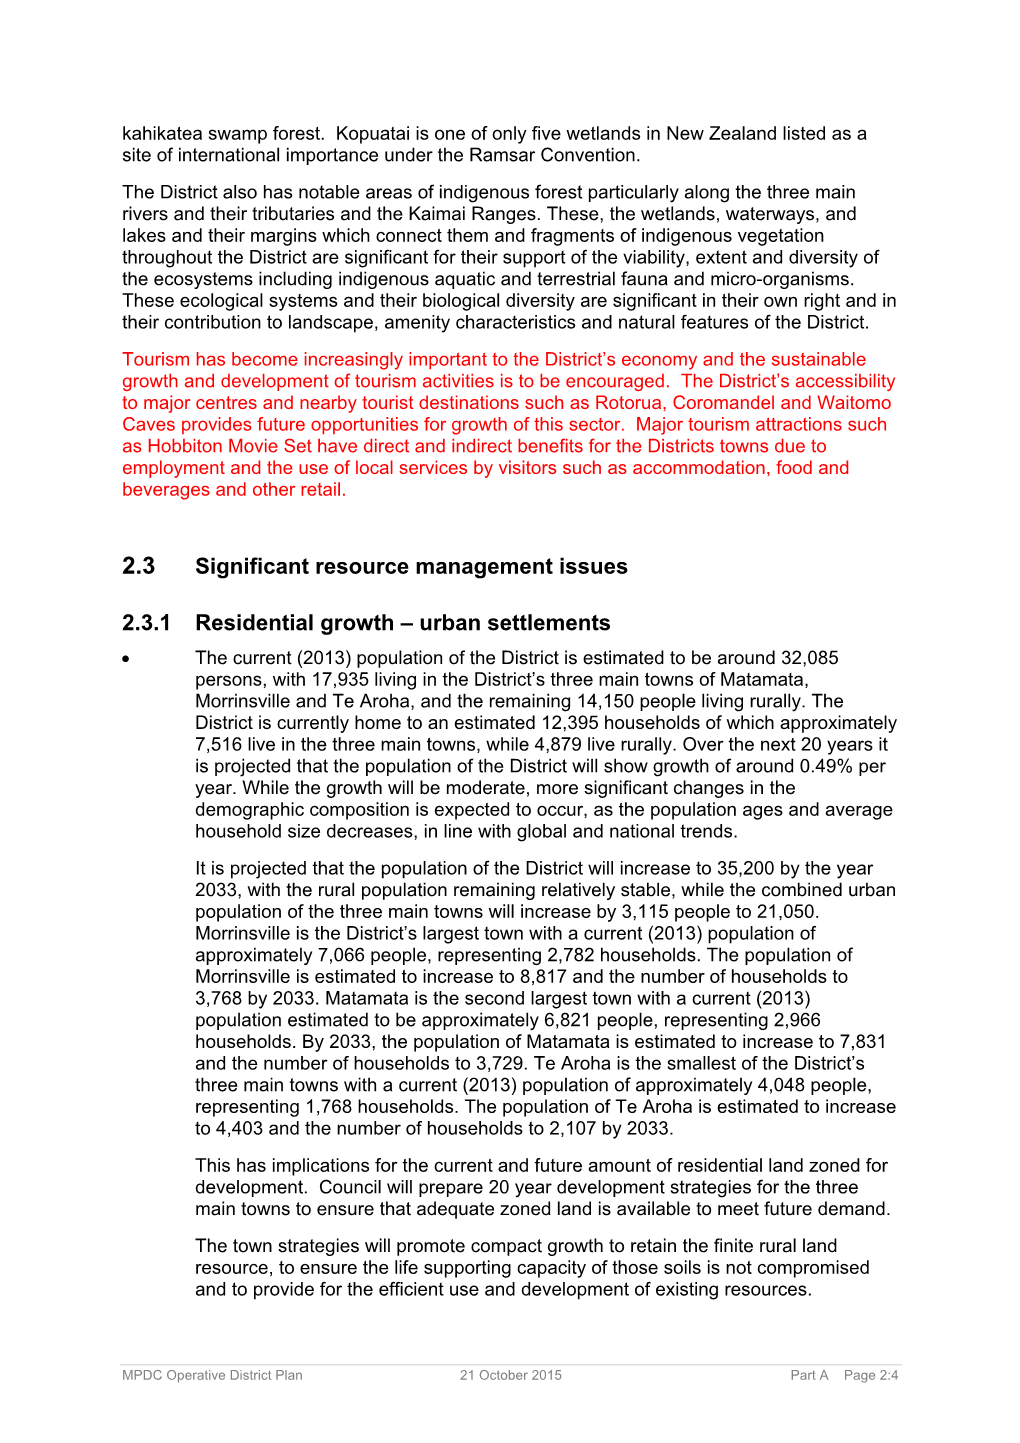 Significant Resource Management Issues 2.3.1 Residential Growth